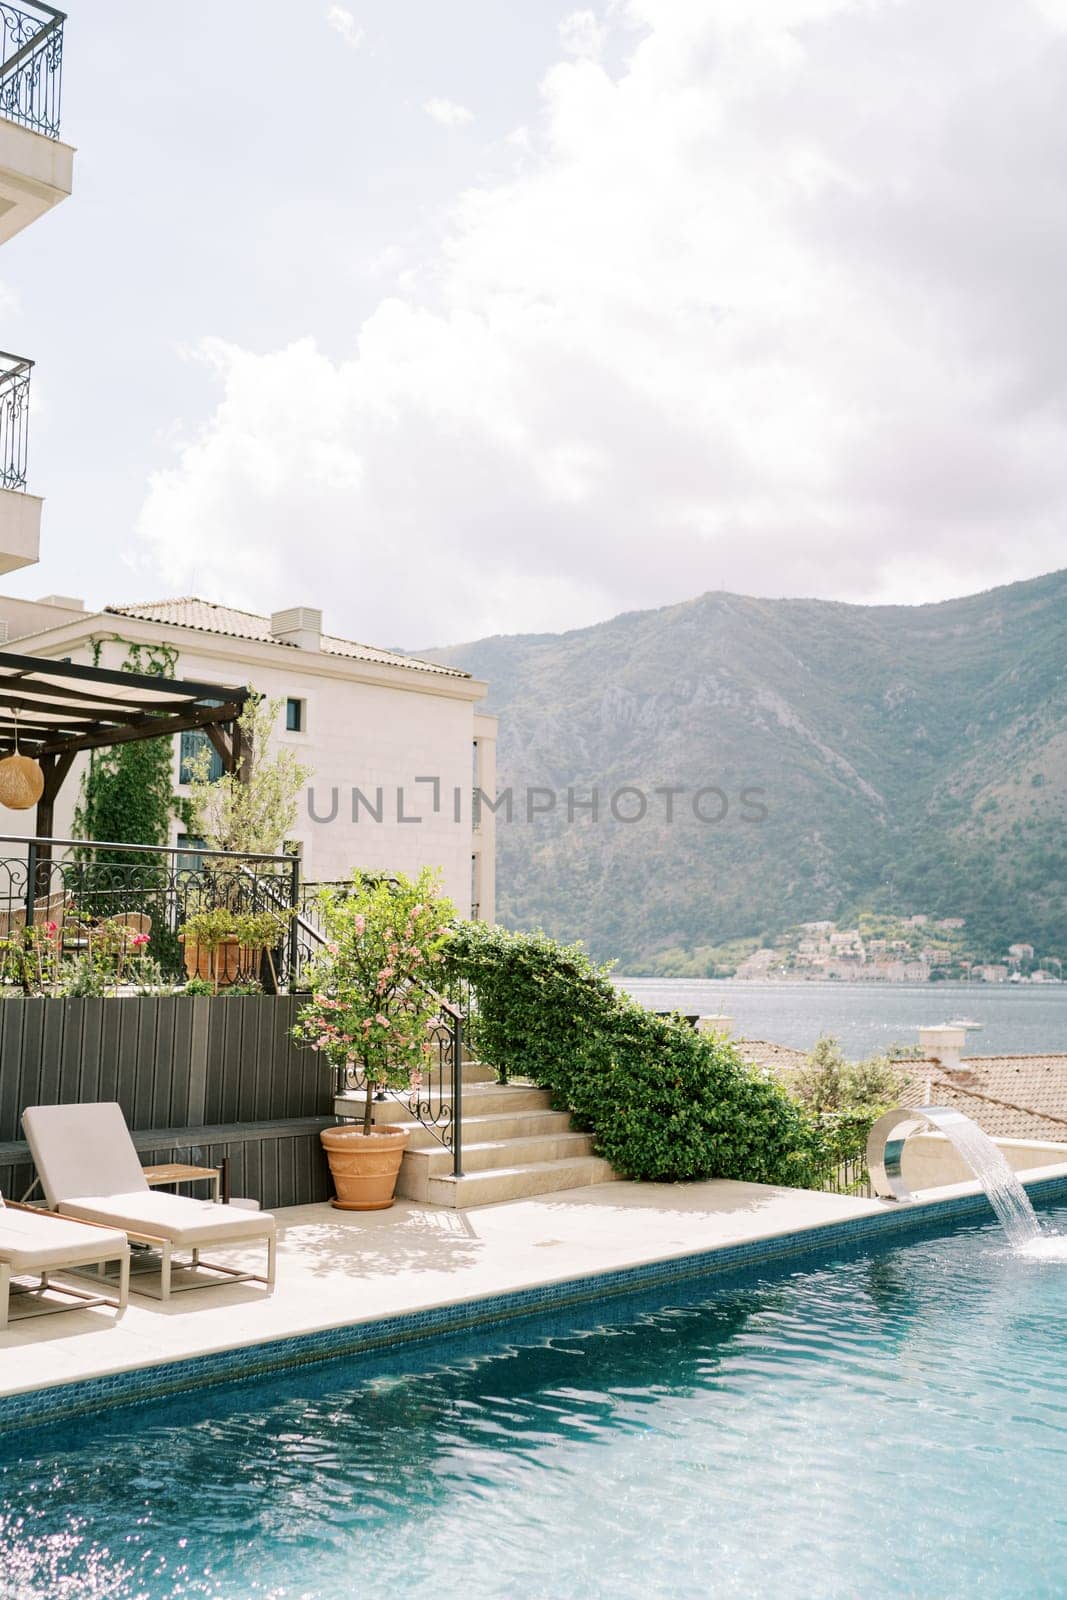 Swimming pool in the courtyard of the villa with soft sun loungers and flowering bushes in tubs on the shore. High quality photo